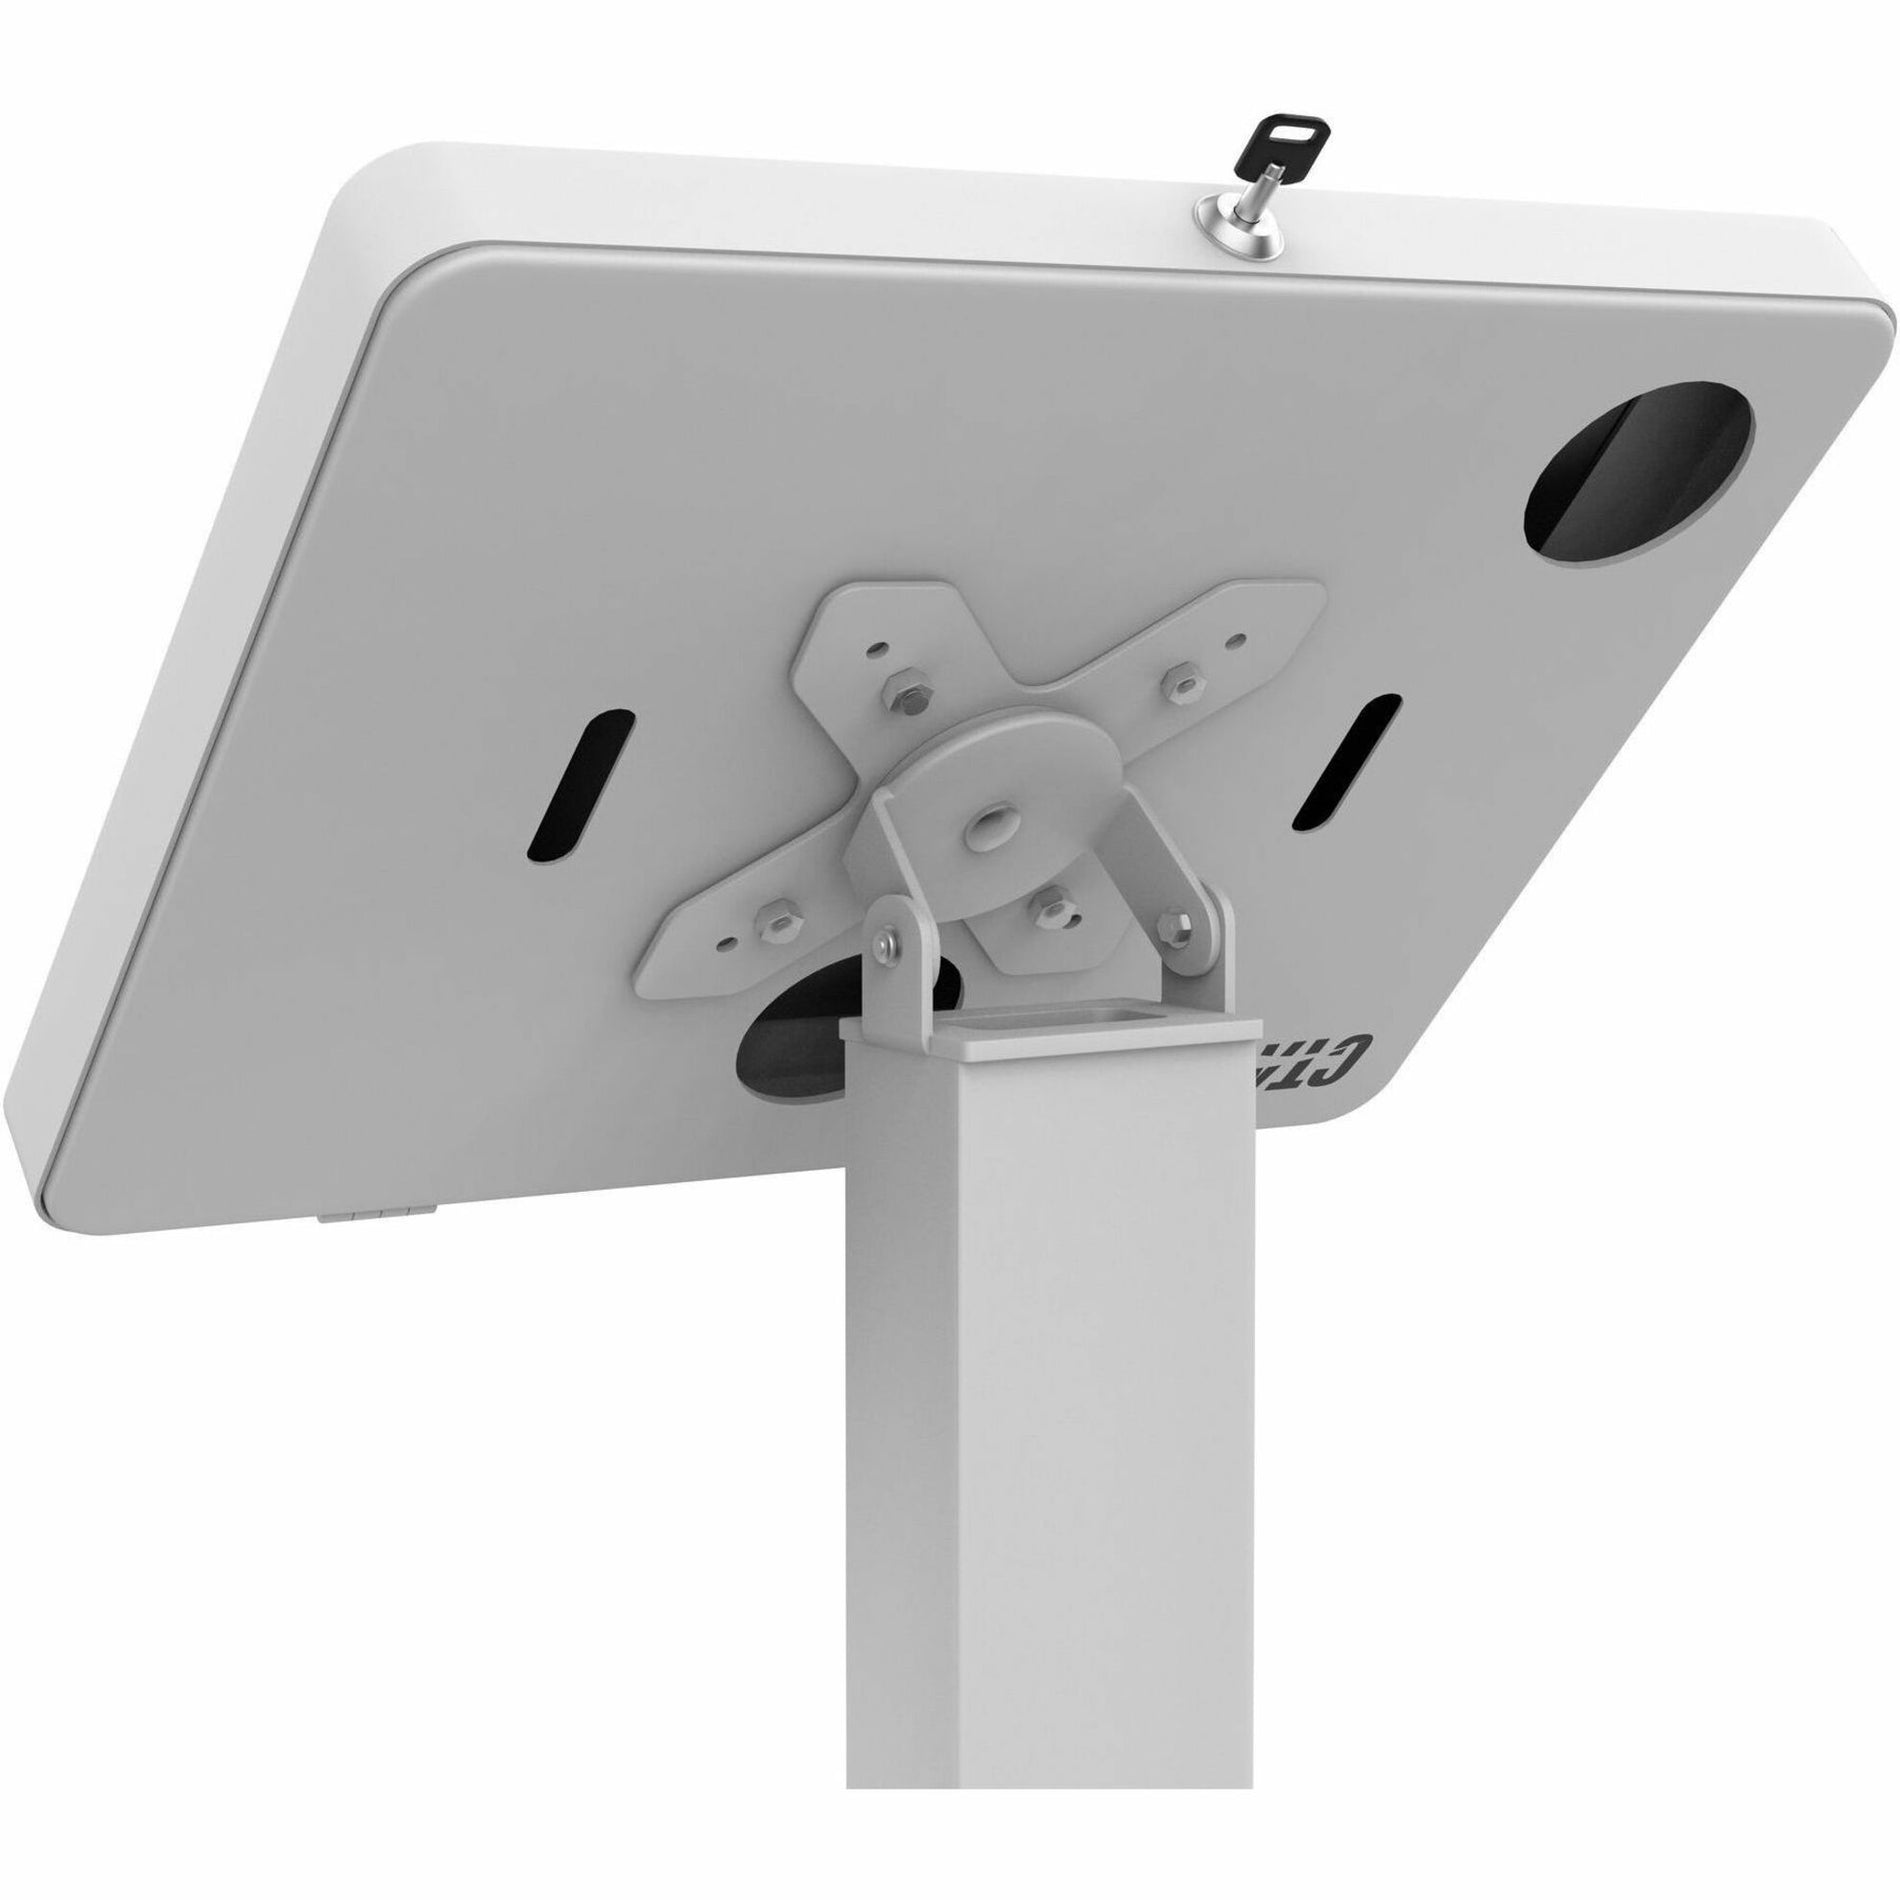 CTA Digital PAD-CHKW Tablet PC Stand, Thin Profile Floor Stand with VESA Plate & Base